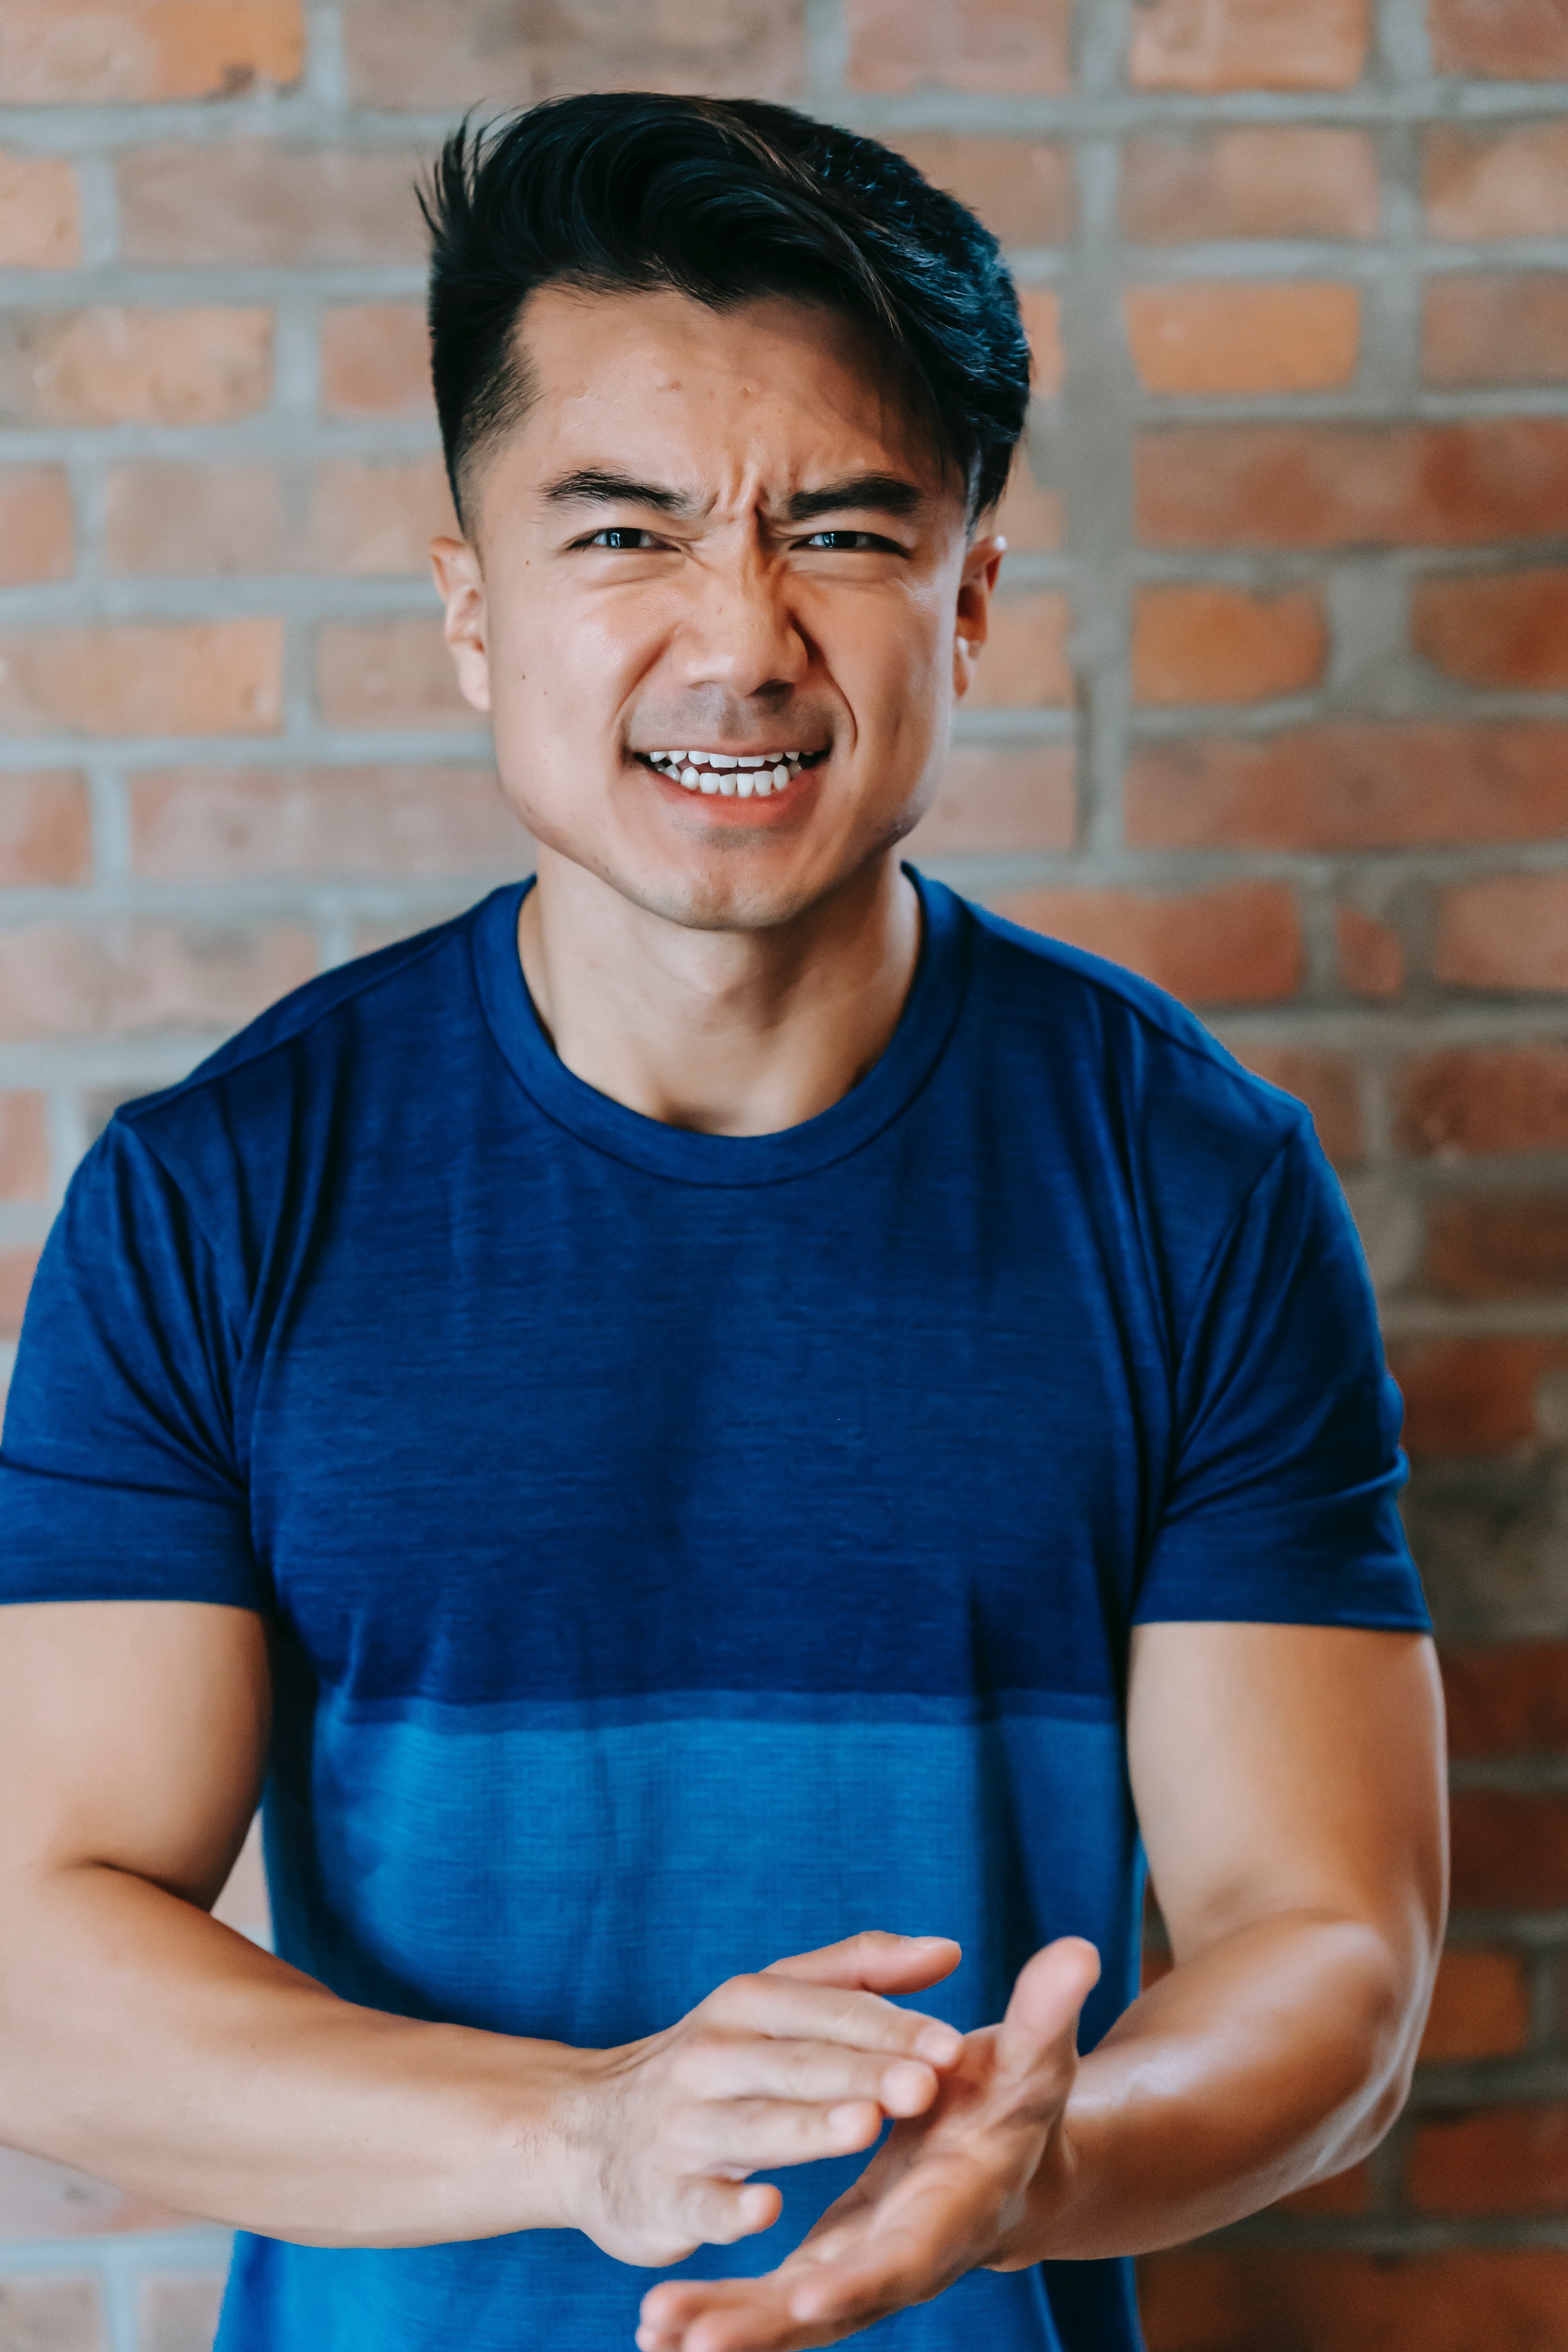 Angry man in a blue T-shirt | Photo: Pexels